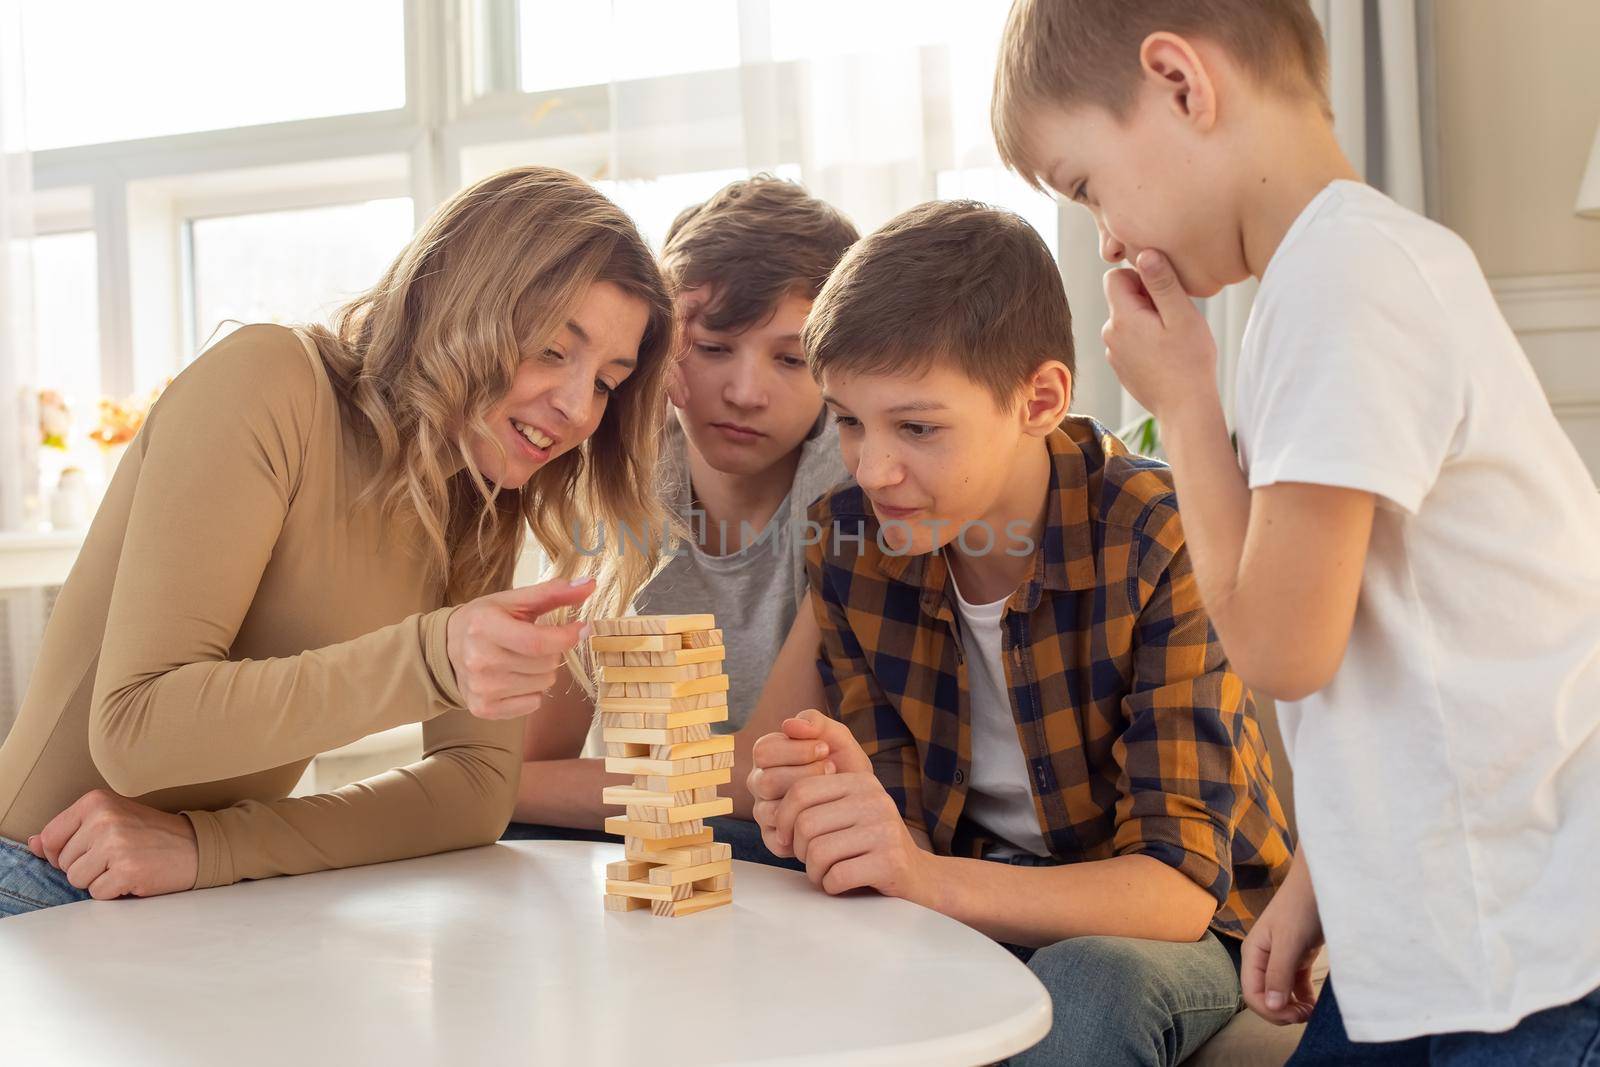 Three boys and woman, in a room, playing a board game made of wooden rectangular blocks, pulling pieces out of the tower. Top view